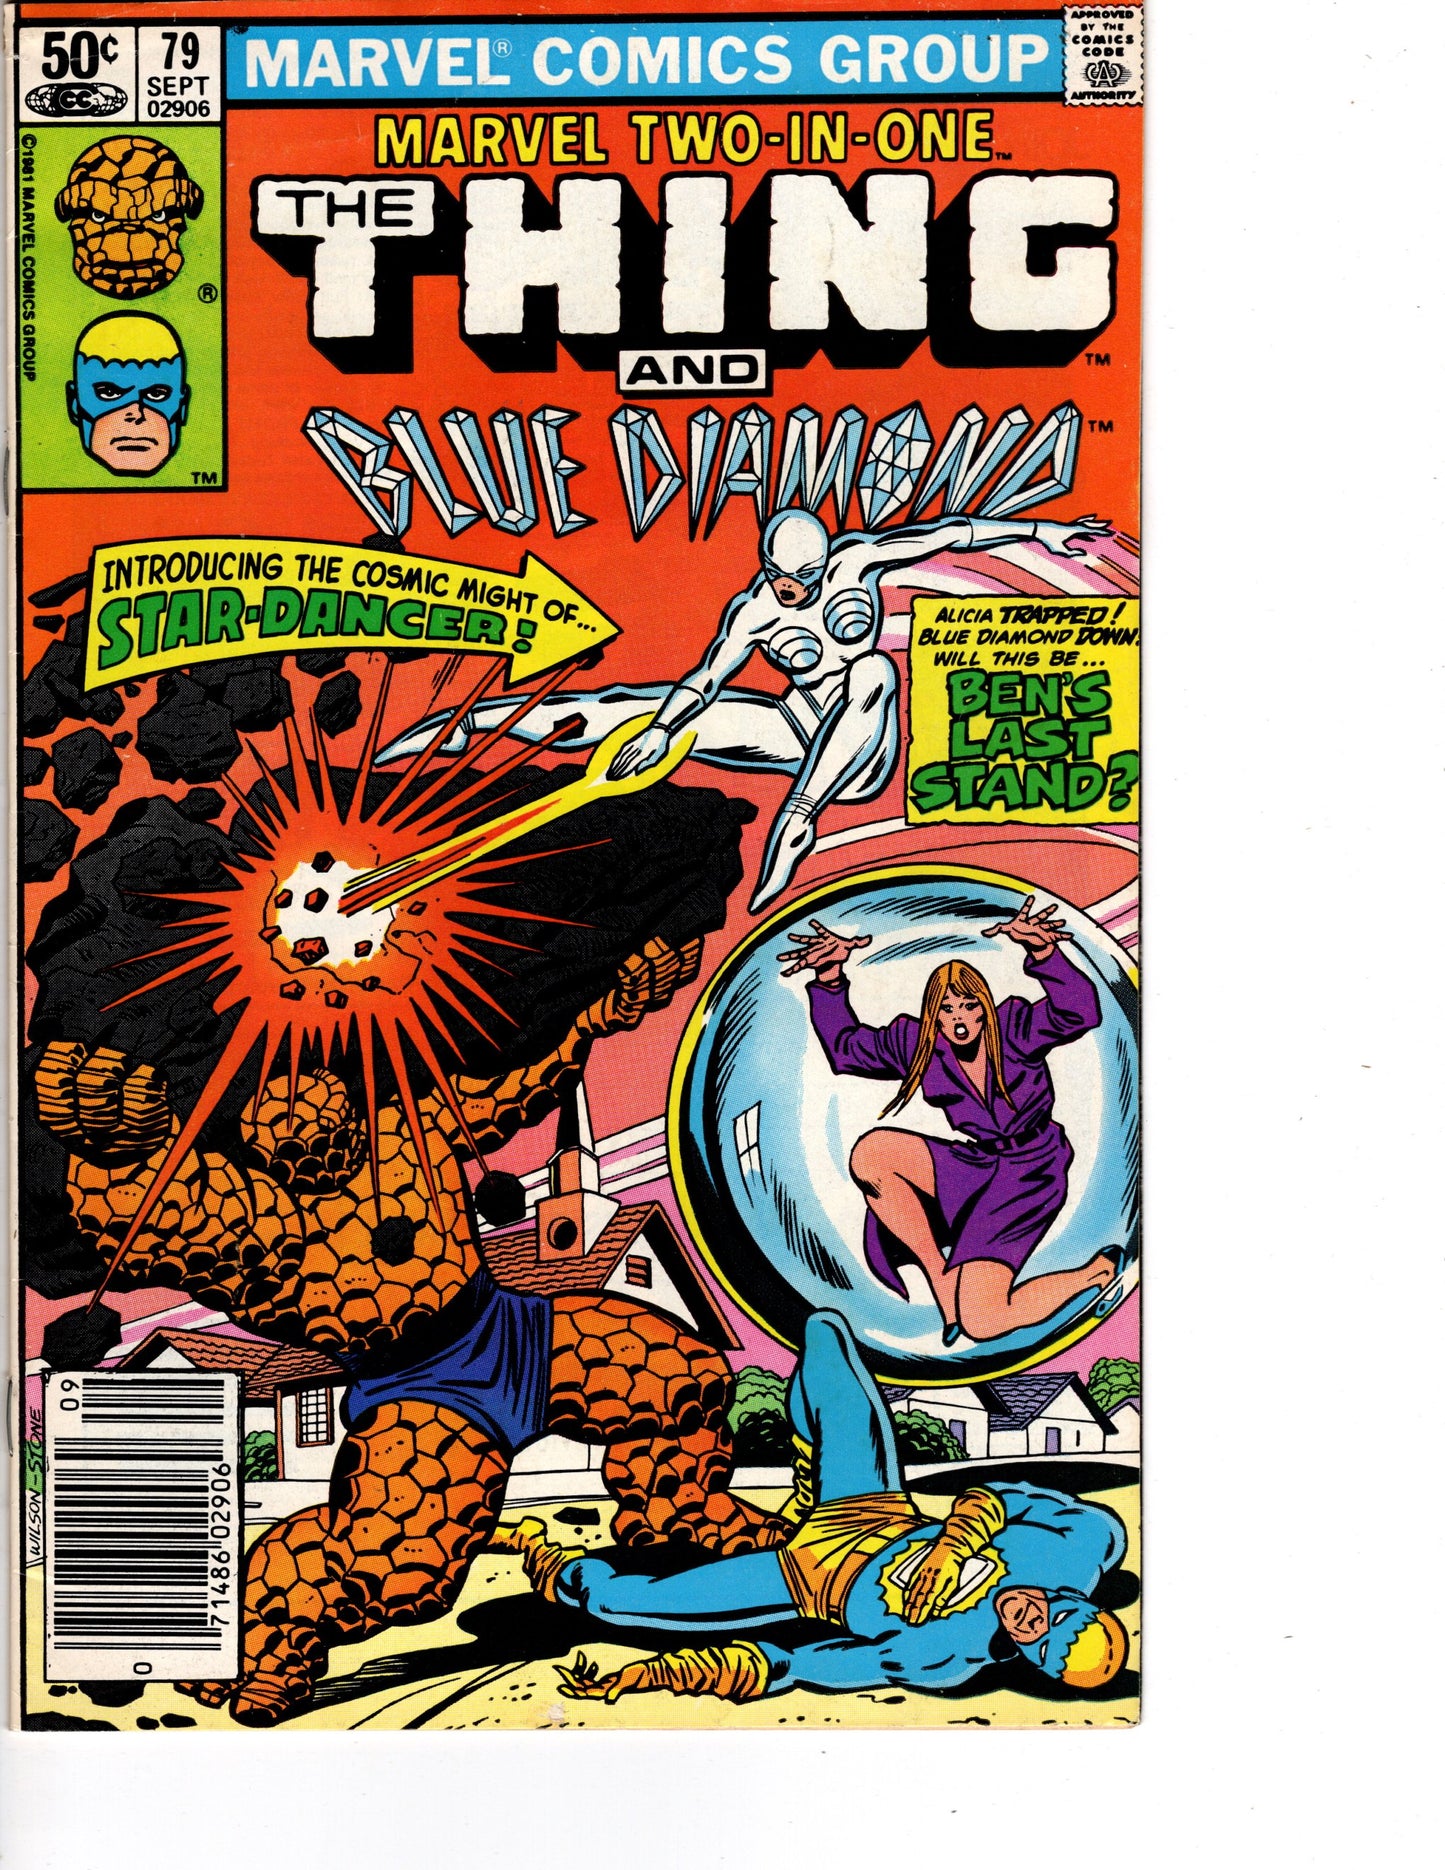 Marvel Two - In - One #79